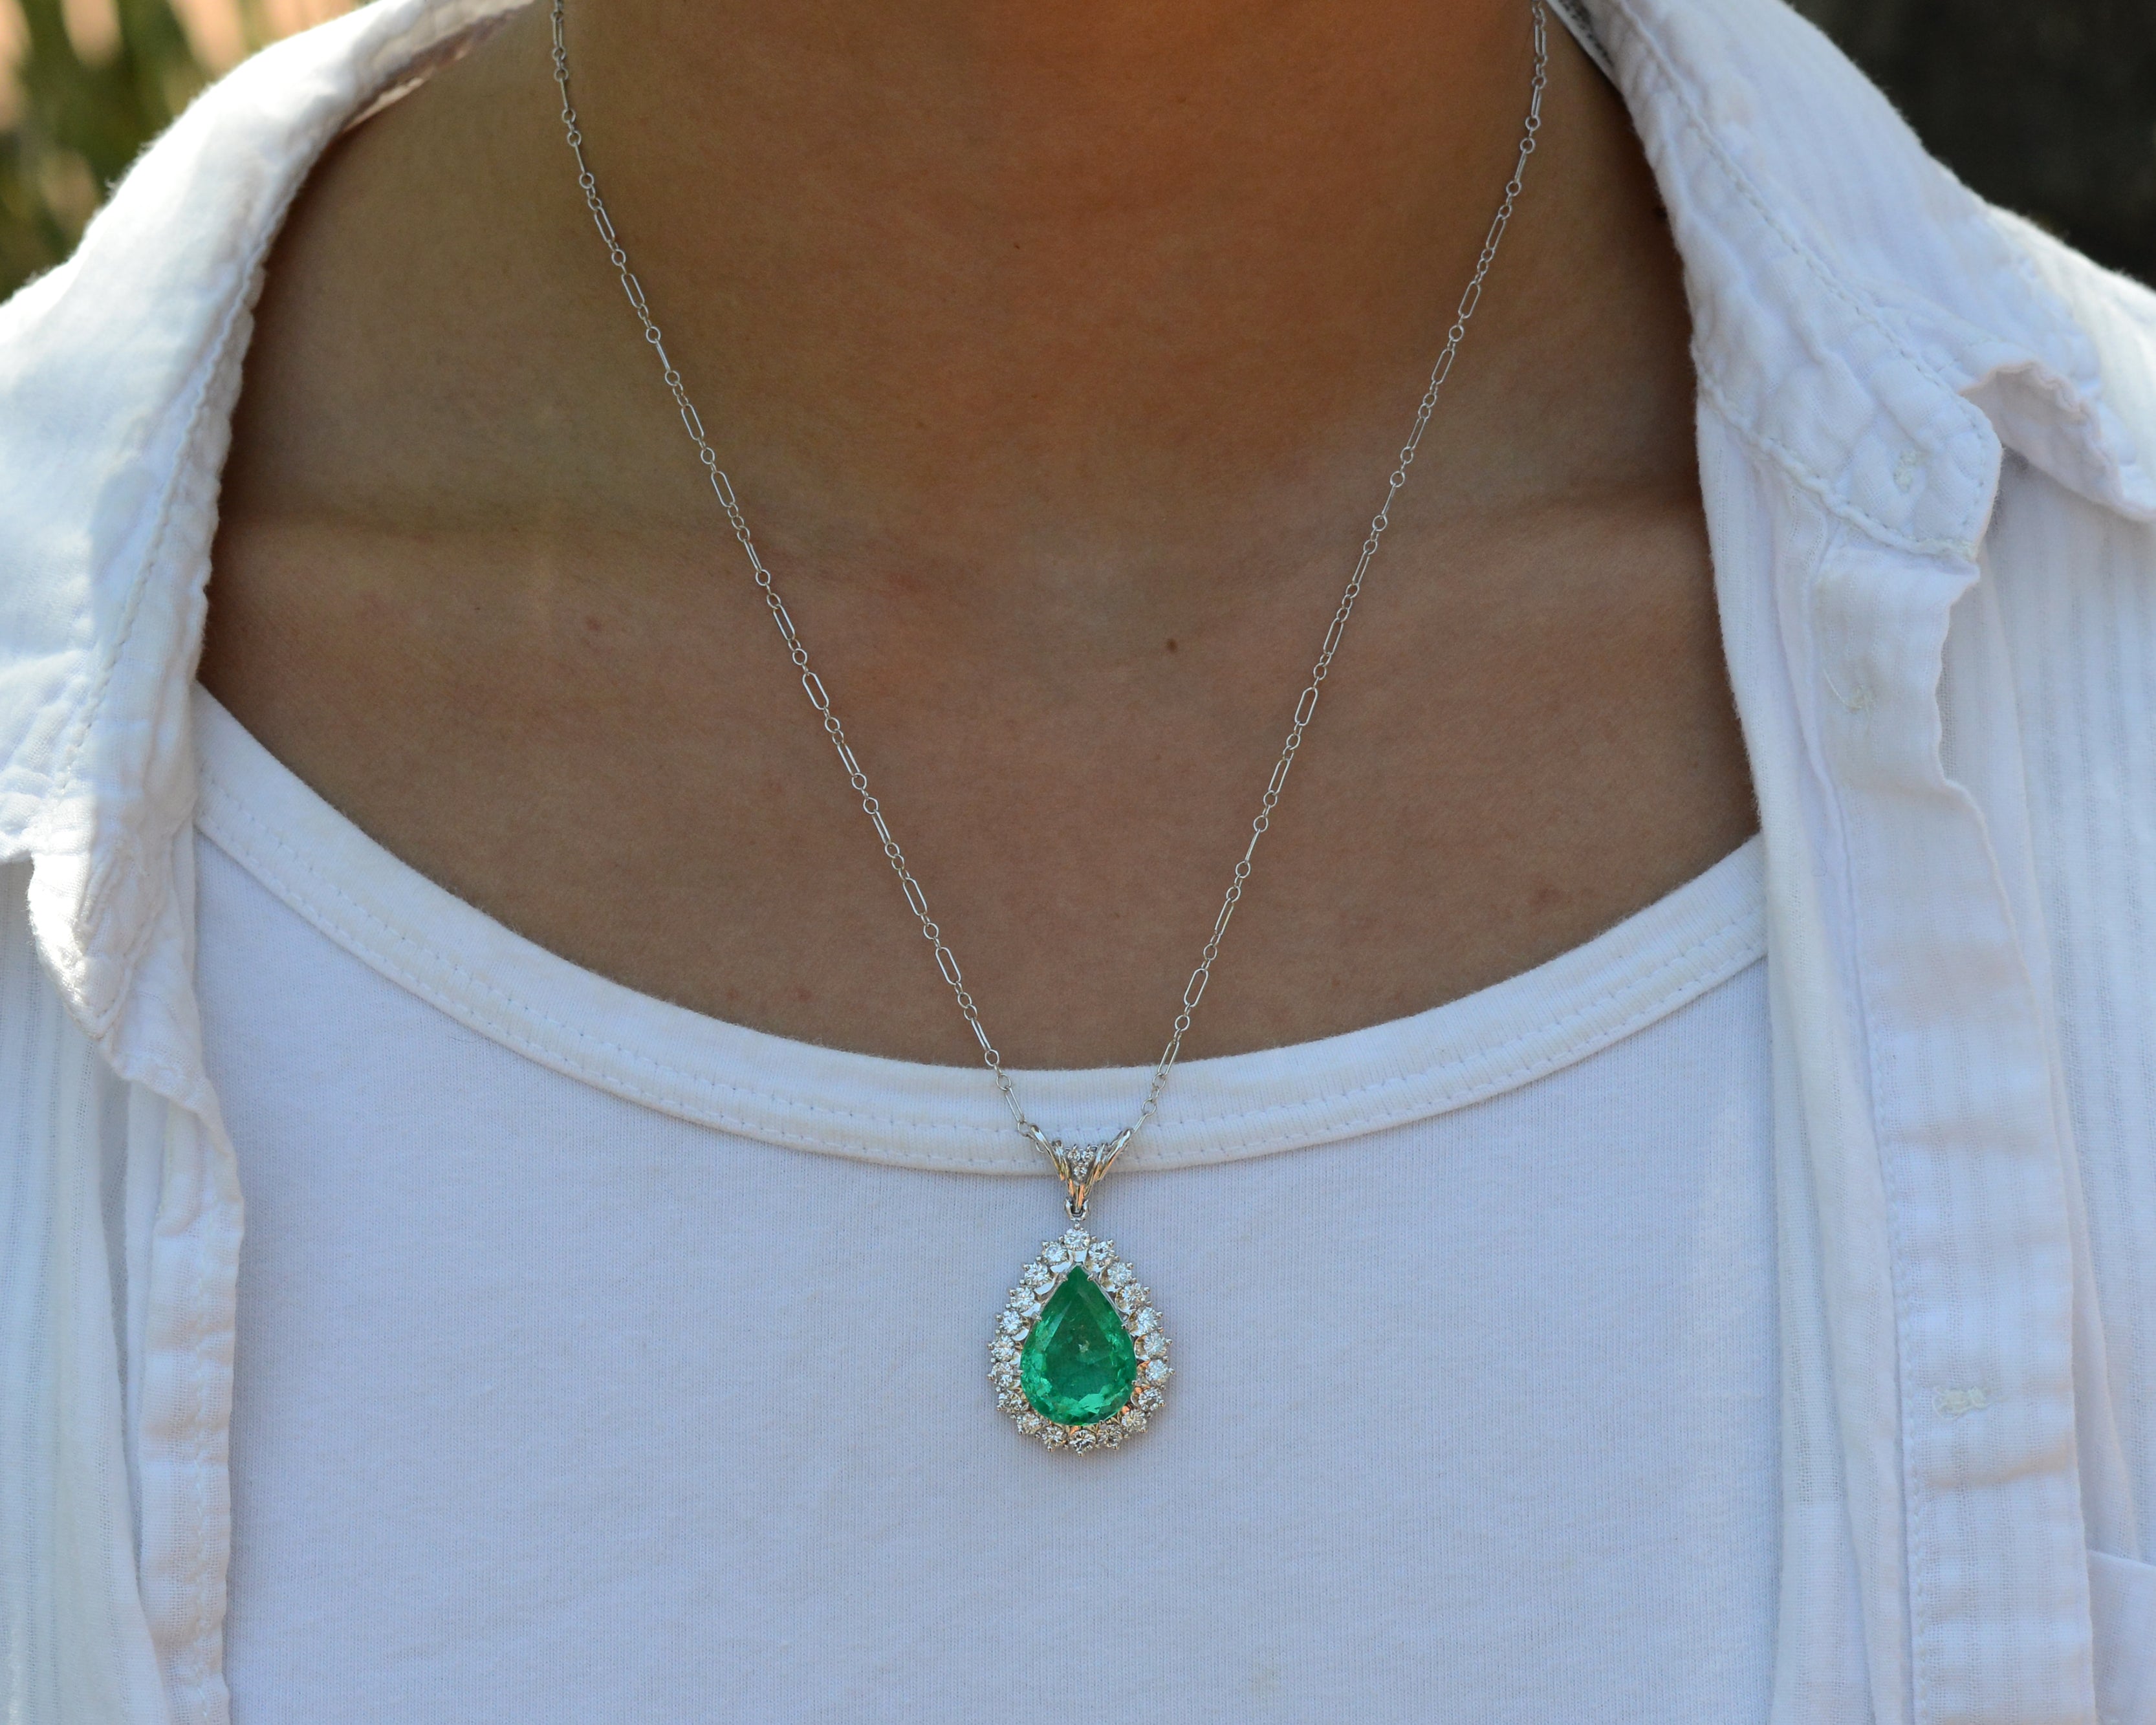 GIA Certified 10 Carat Colombian Emerald Necklace